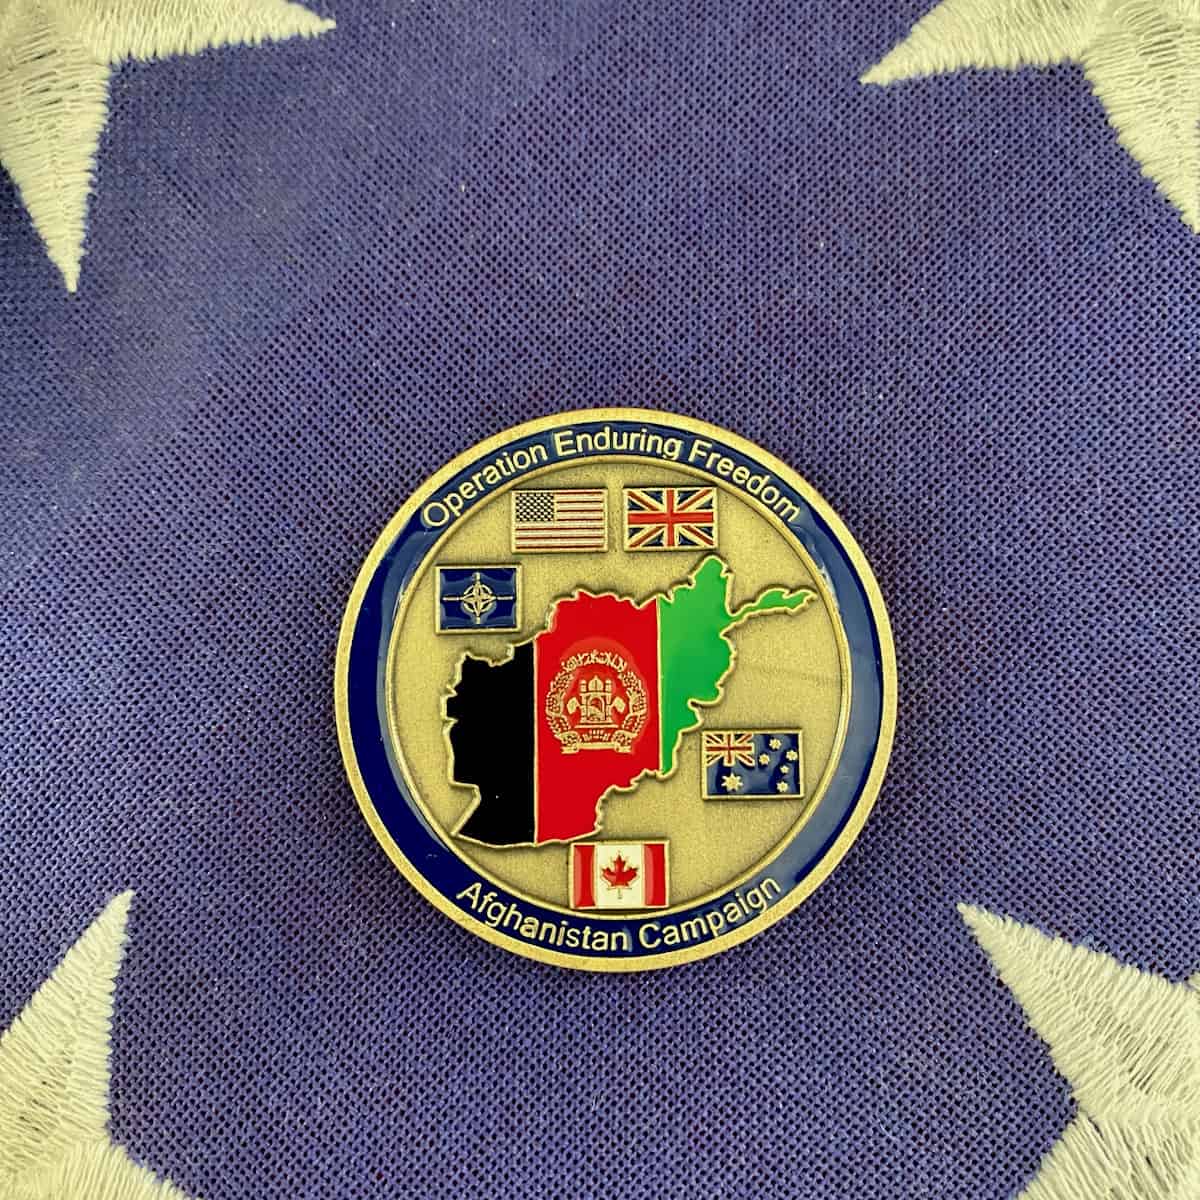 Military challenge coin.